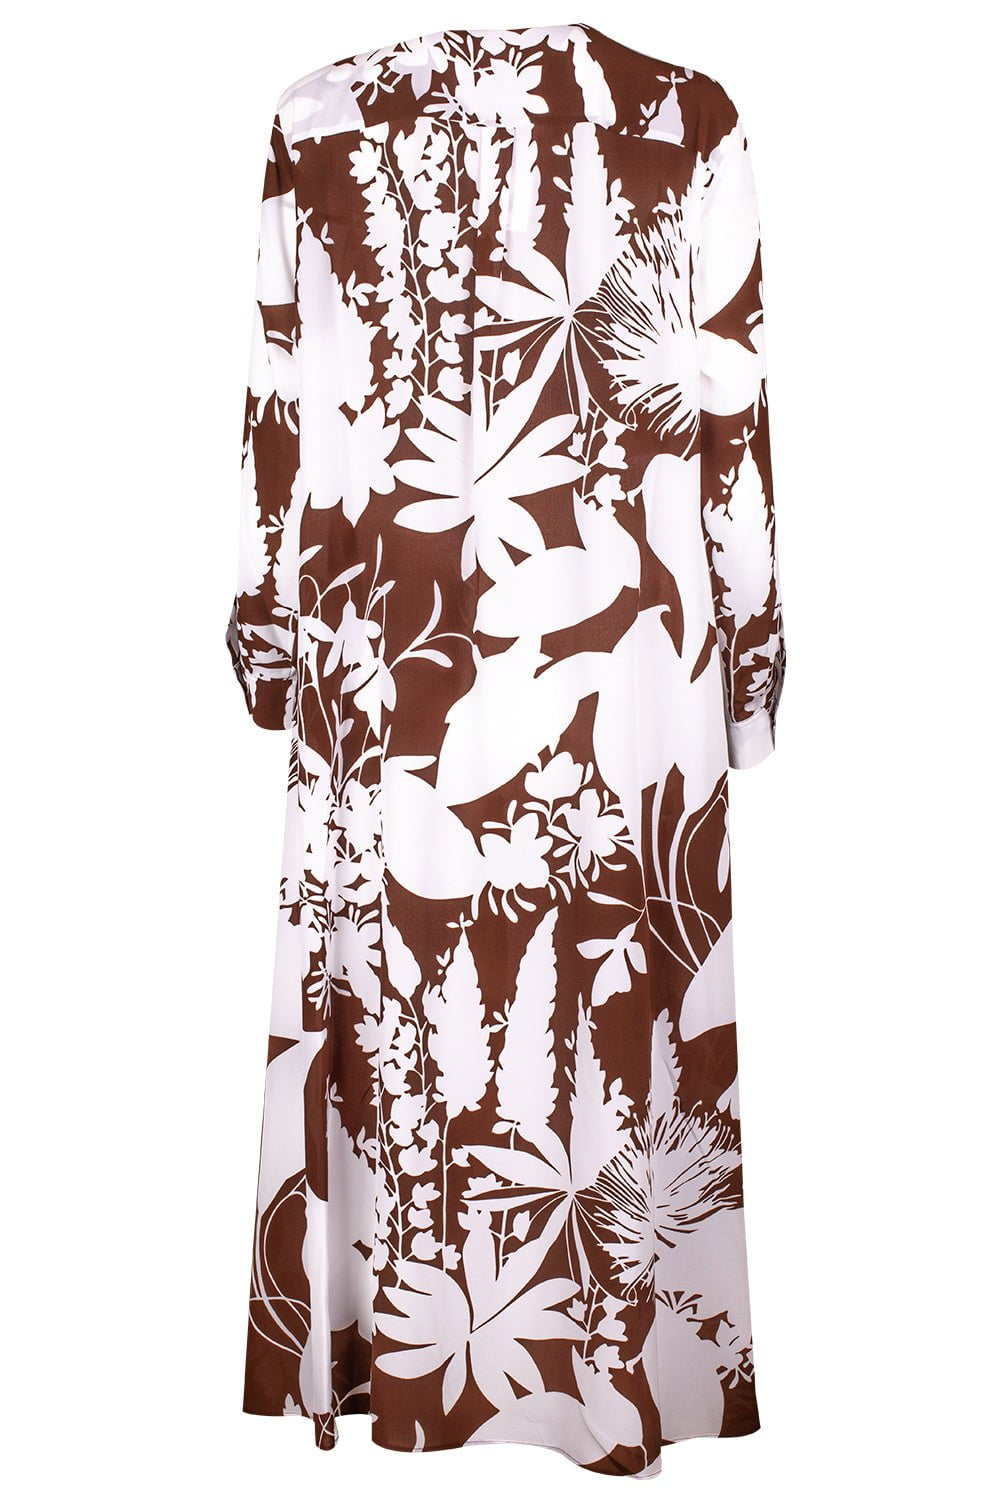 Shadow Floral Caftan CLOTHINGDRESSCASUAL MICHAEL KORS COLLECTION   